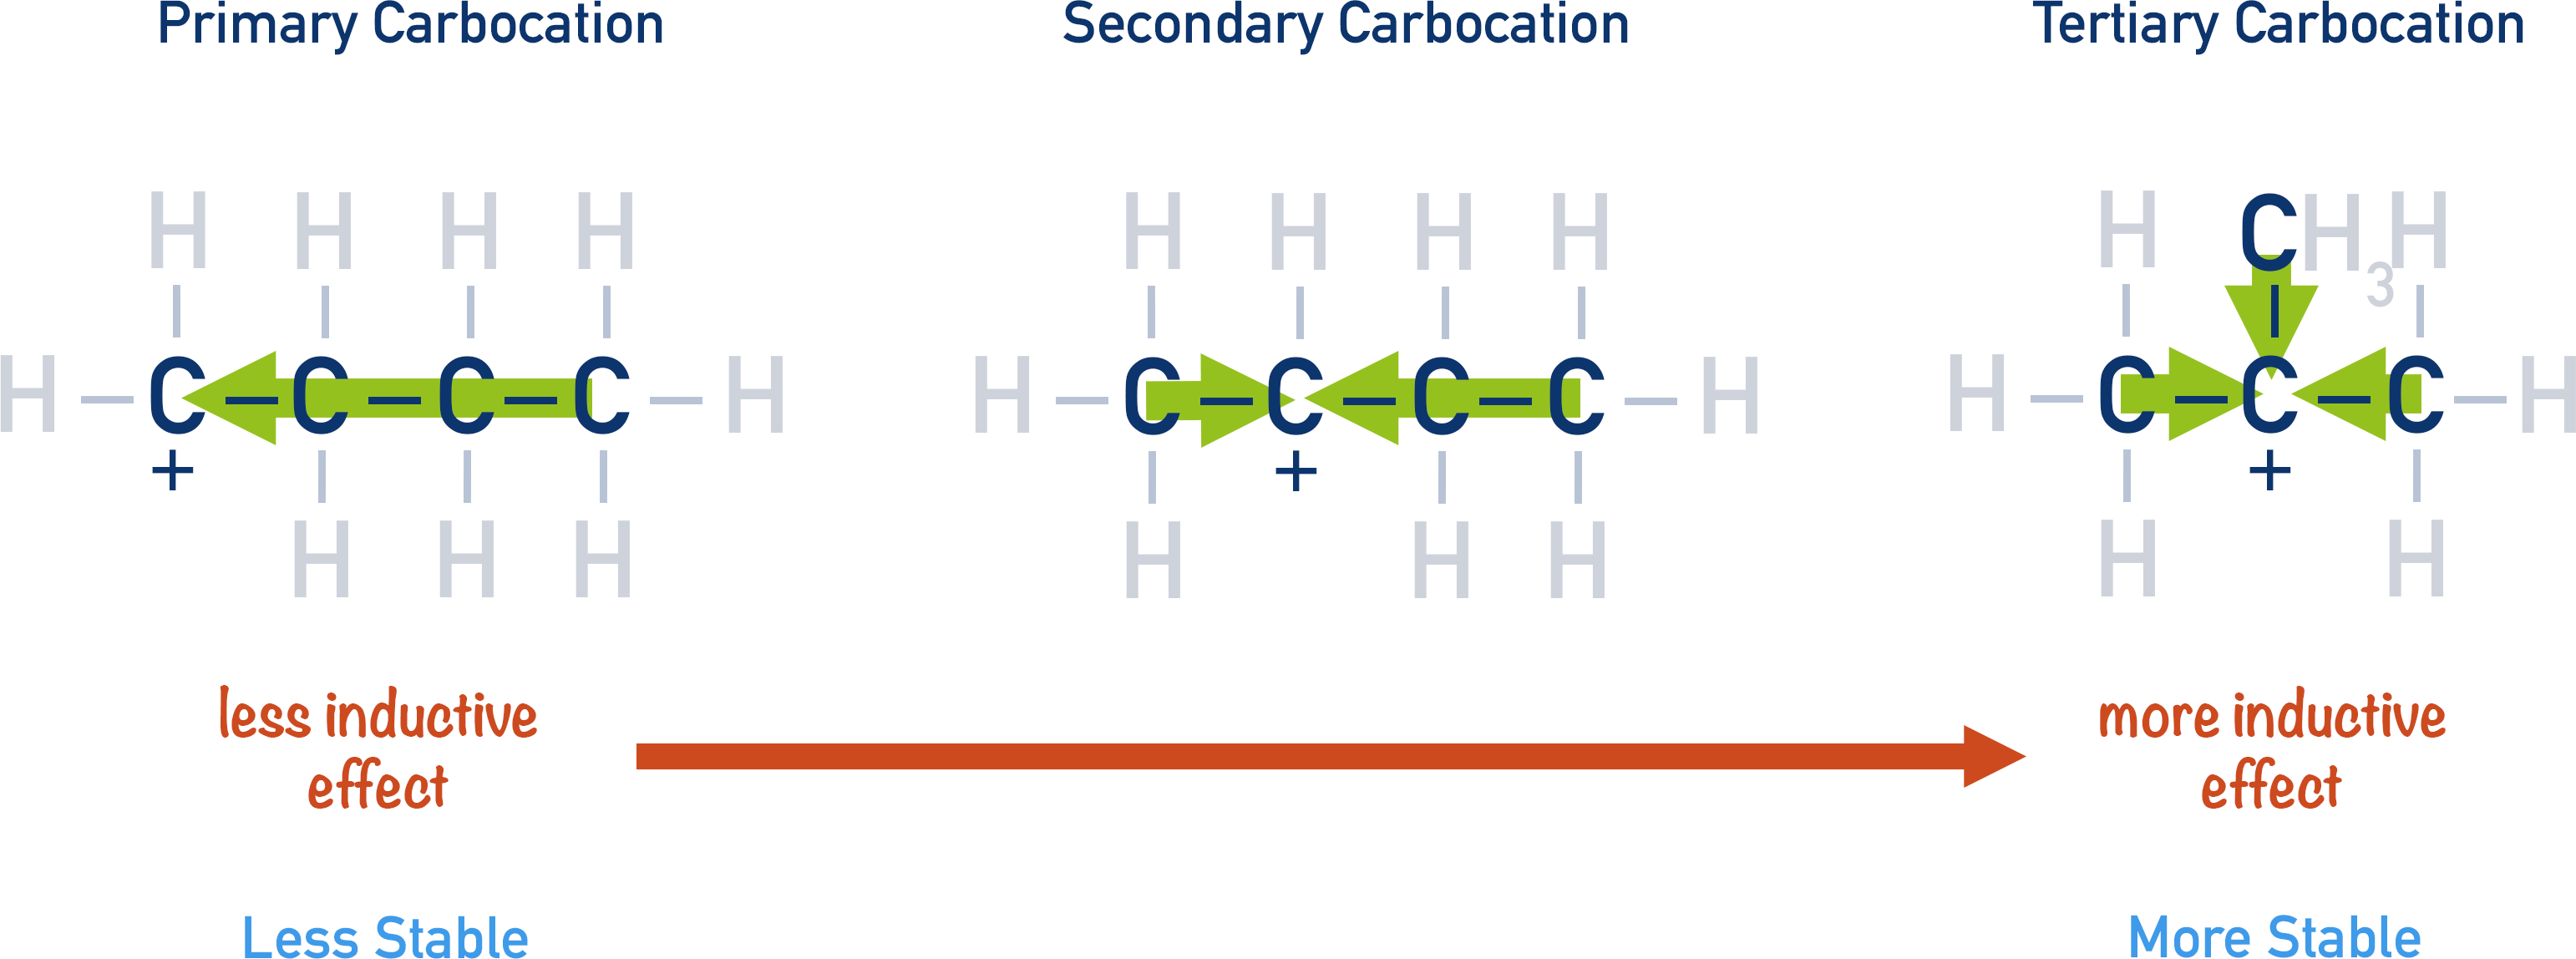 primary secondary and tertiary carbocation stability showing positive inductive effect